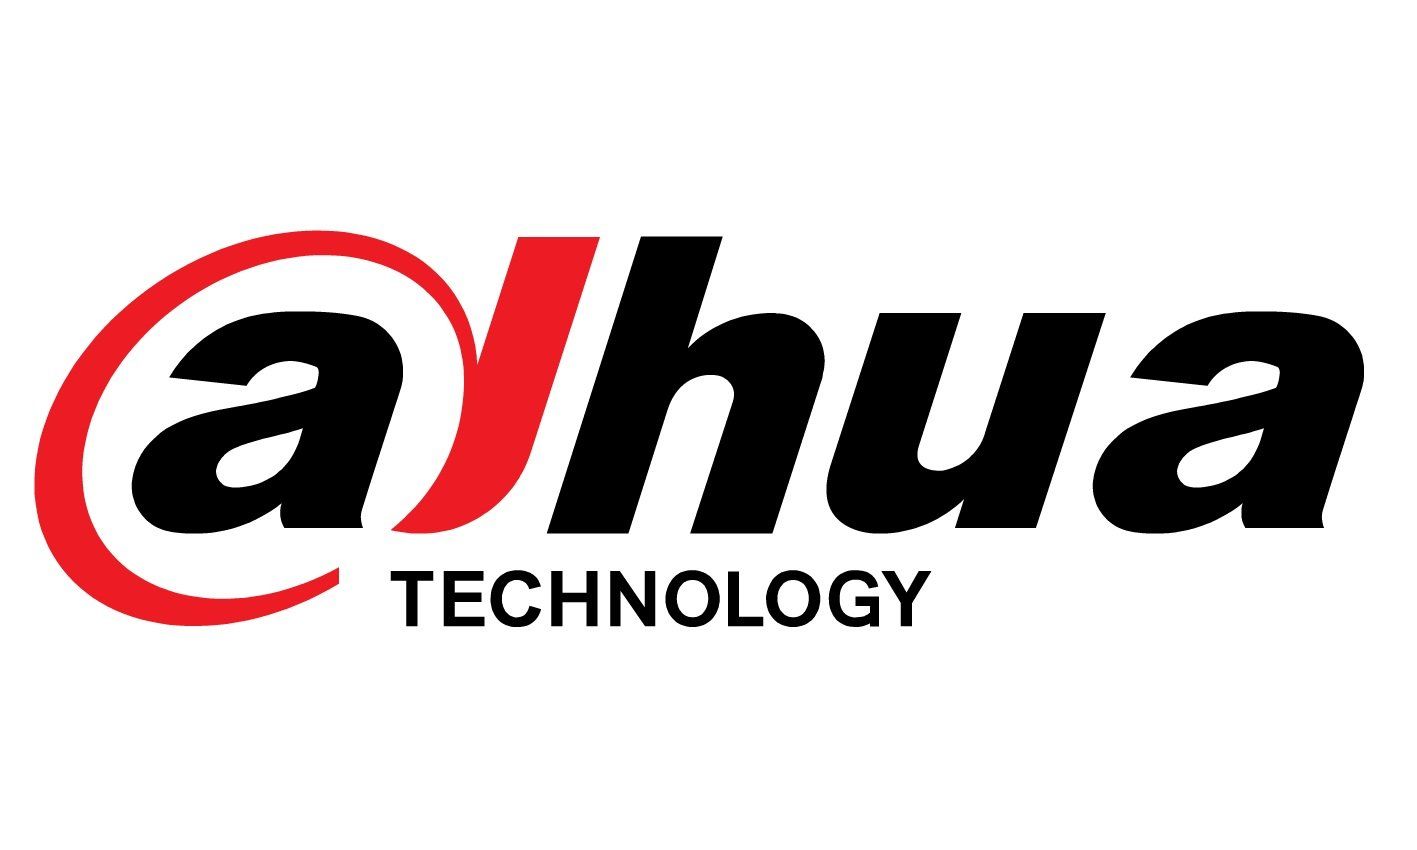 The logo for alhua technology is black and red on a white background.